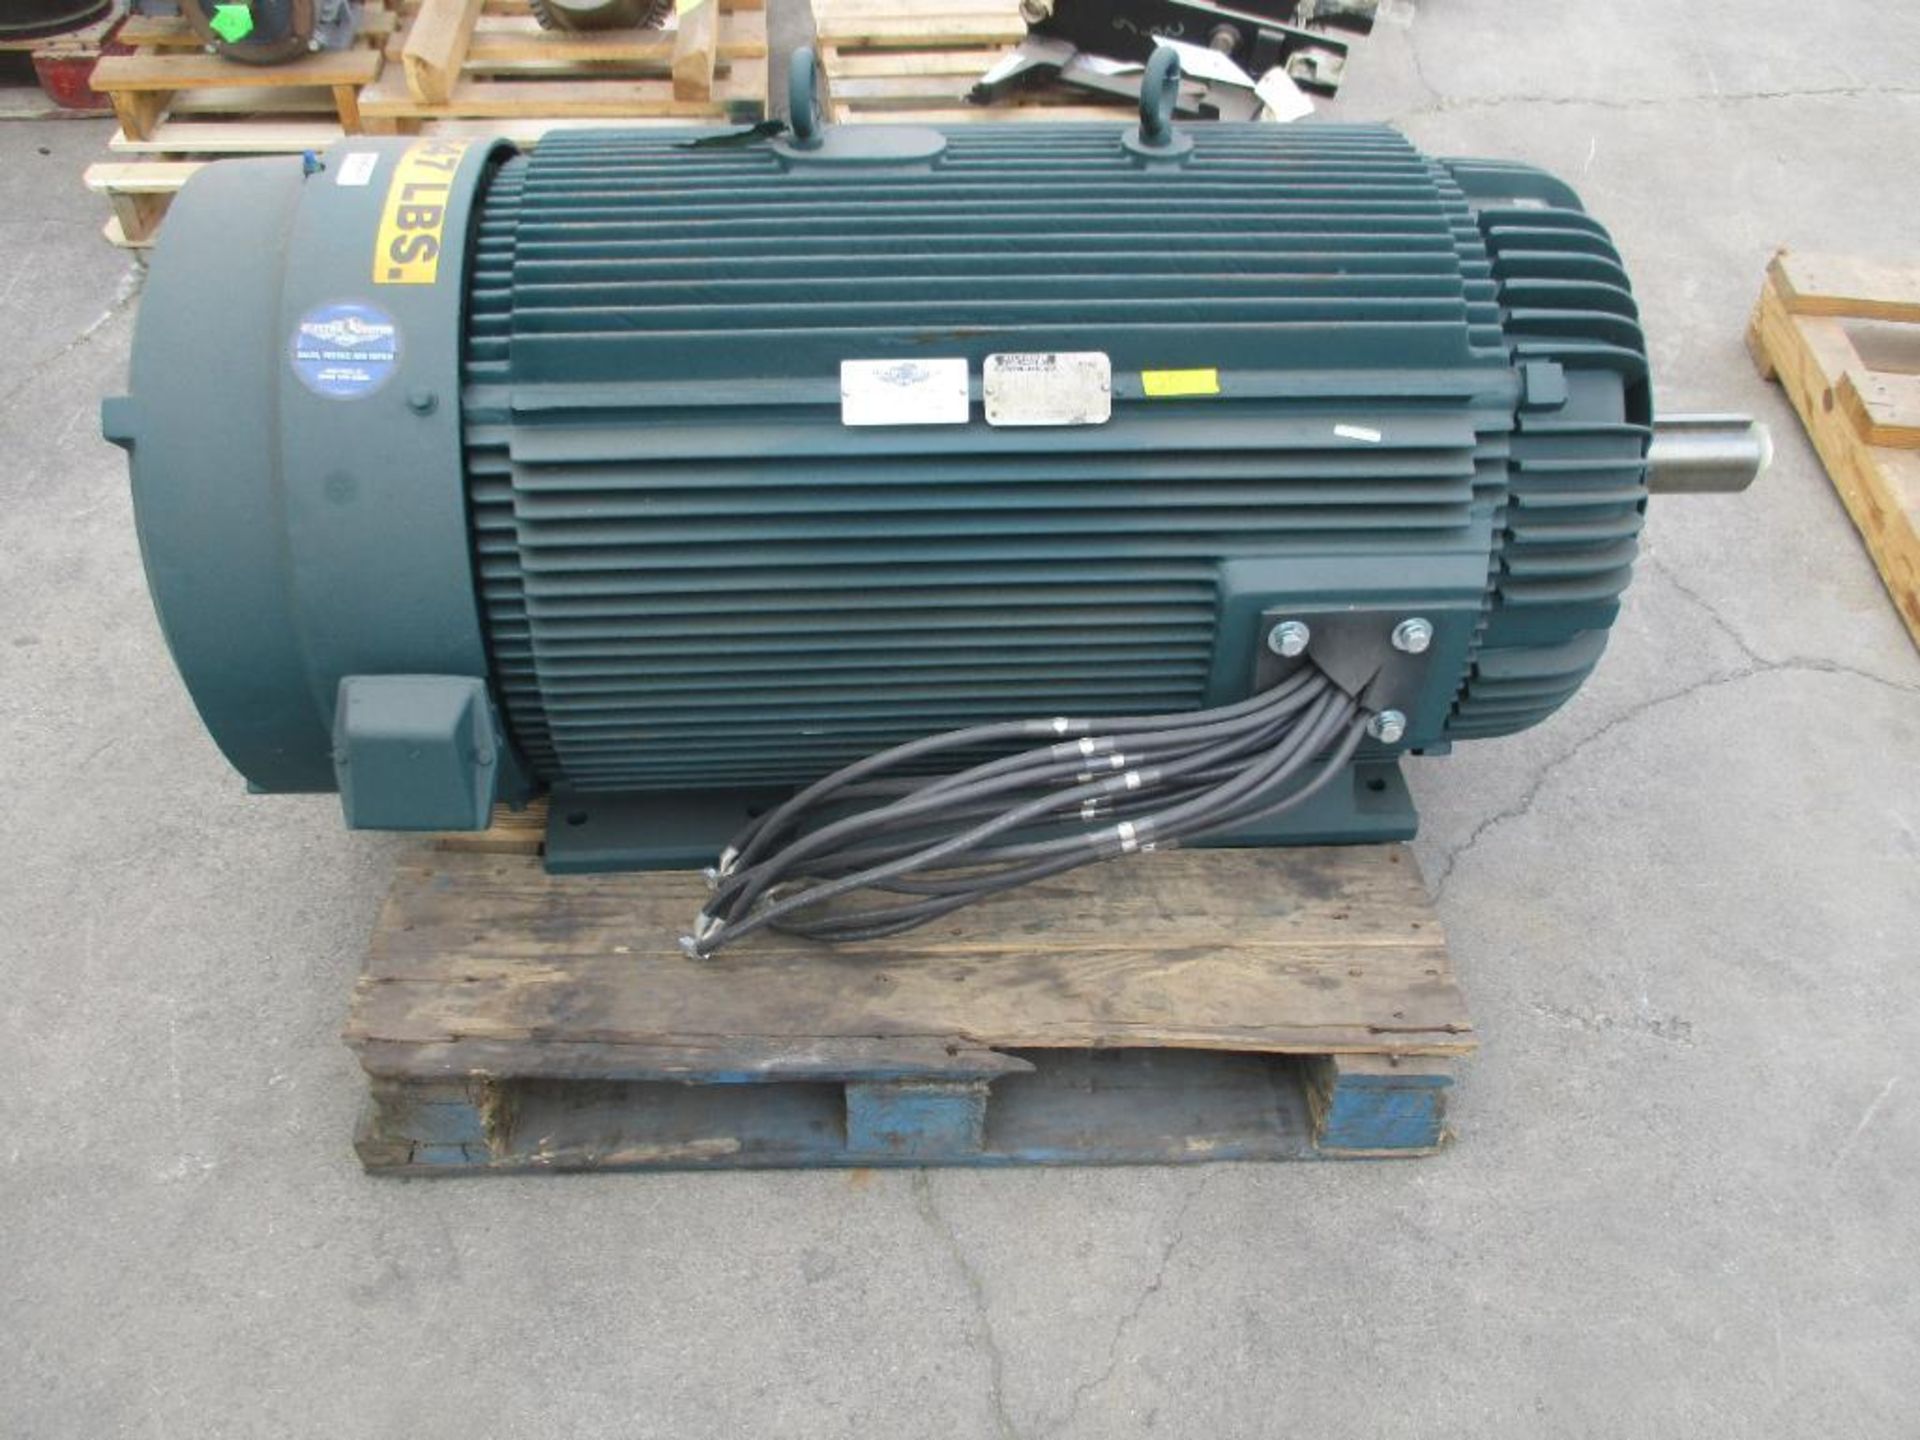 RELIANCE ELECTRIC 3 PHASE 400HP 1791-2686RPM 449T FRAME A/C MOTOR P/N 6304757 3602# LBS (THIS LOT IS